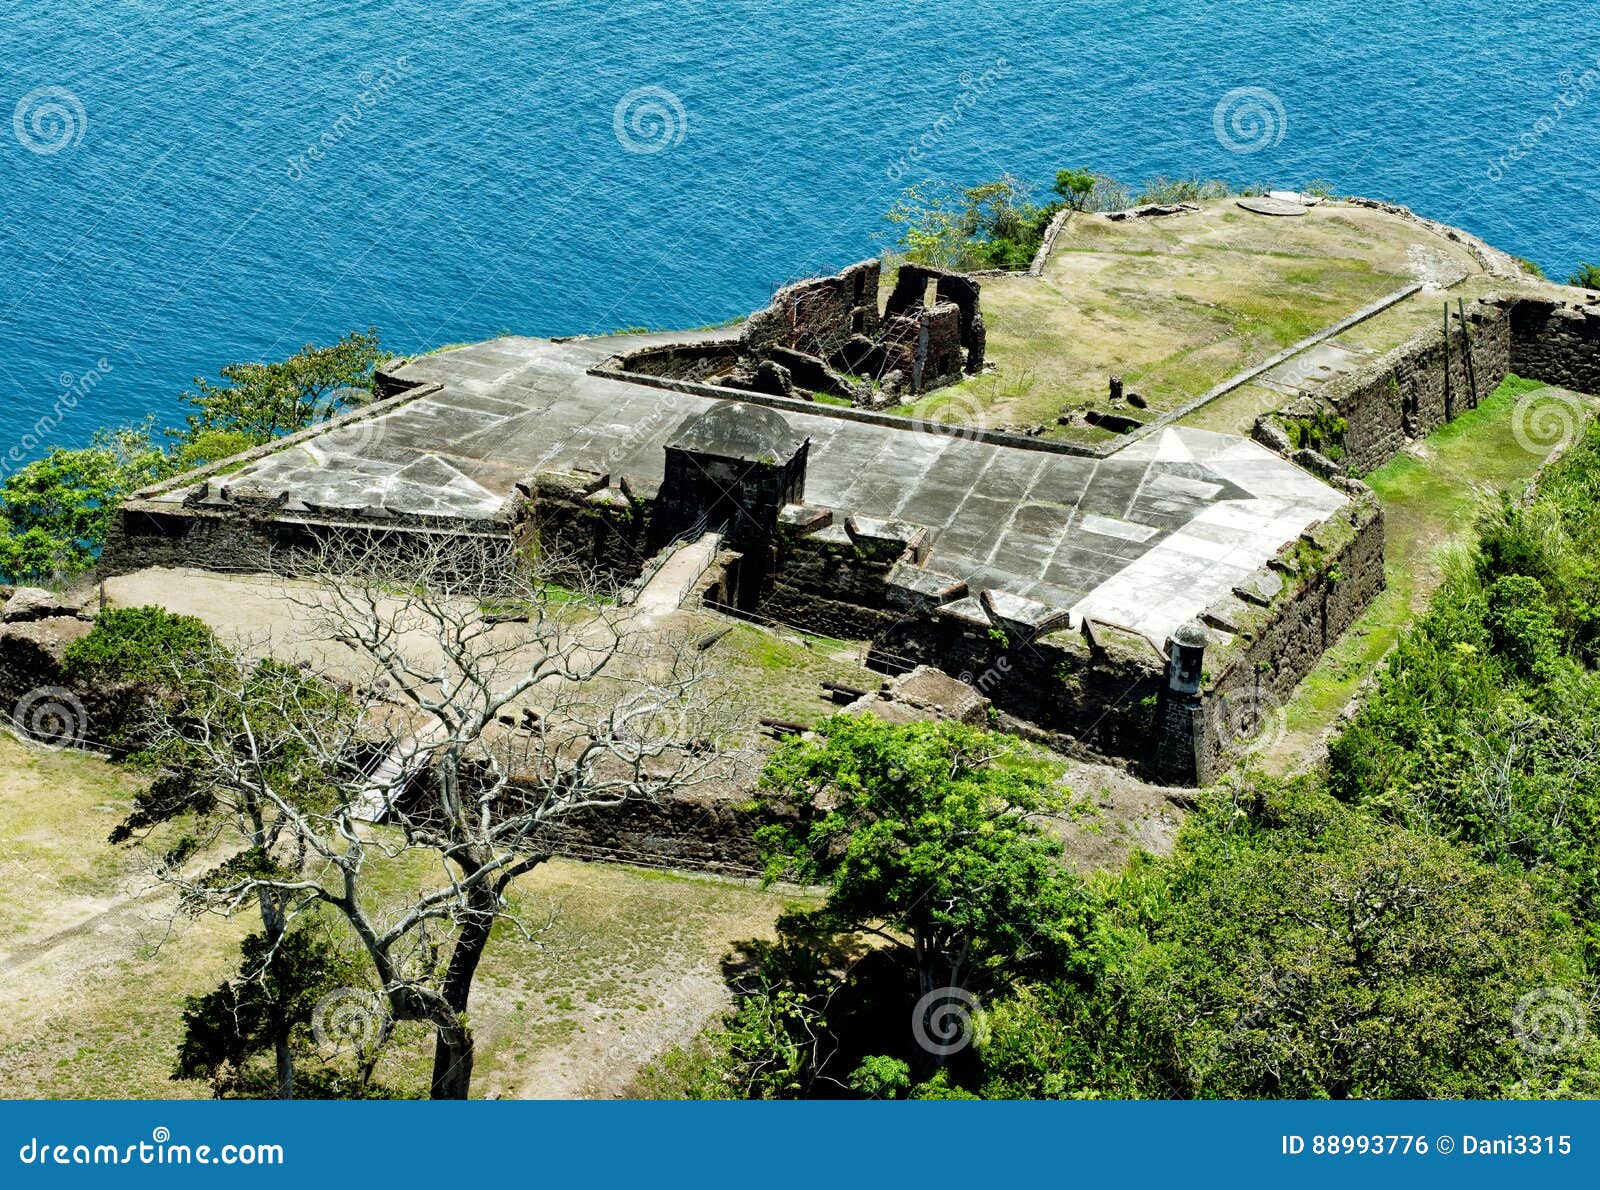 aerial view of fort sherman at toro point, panama canal